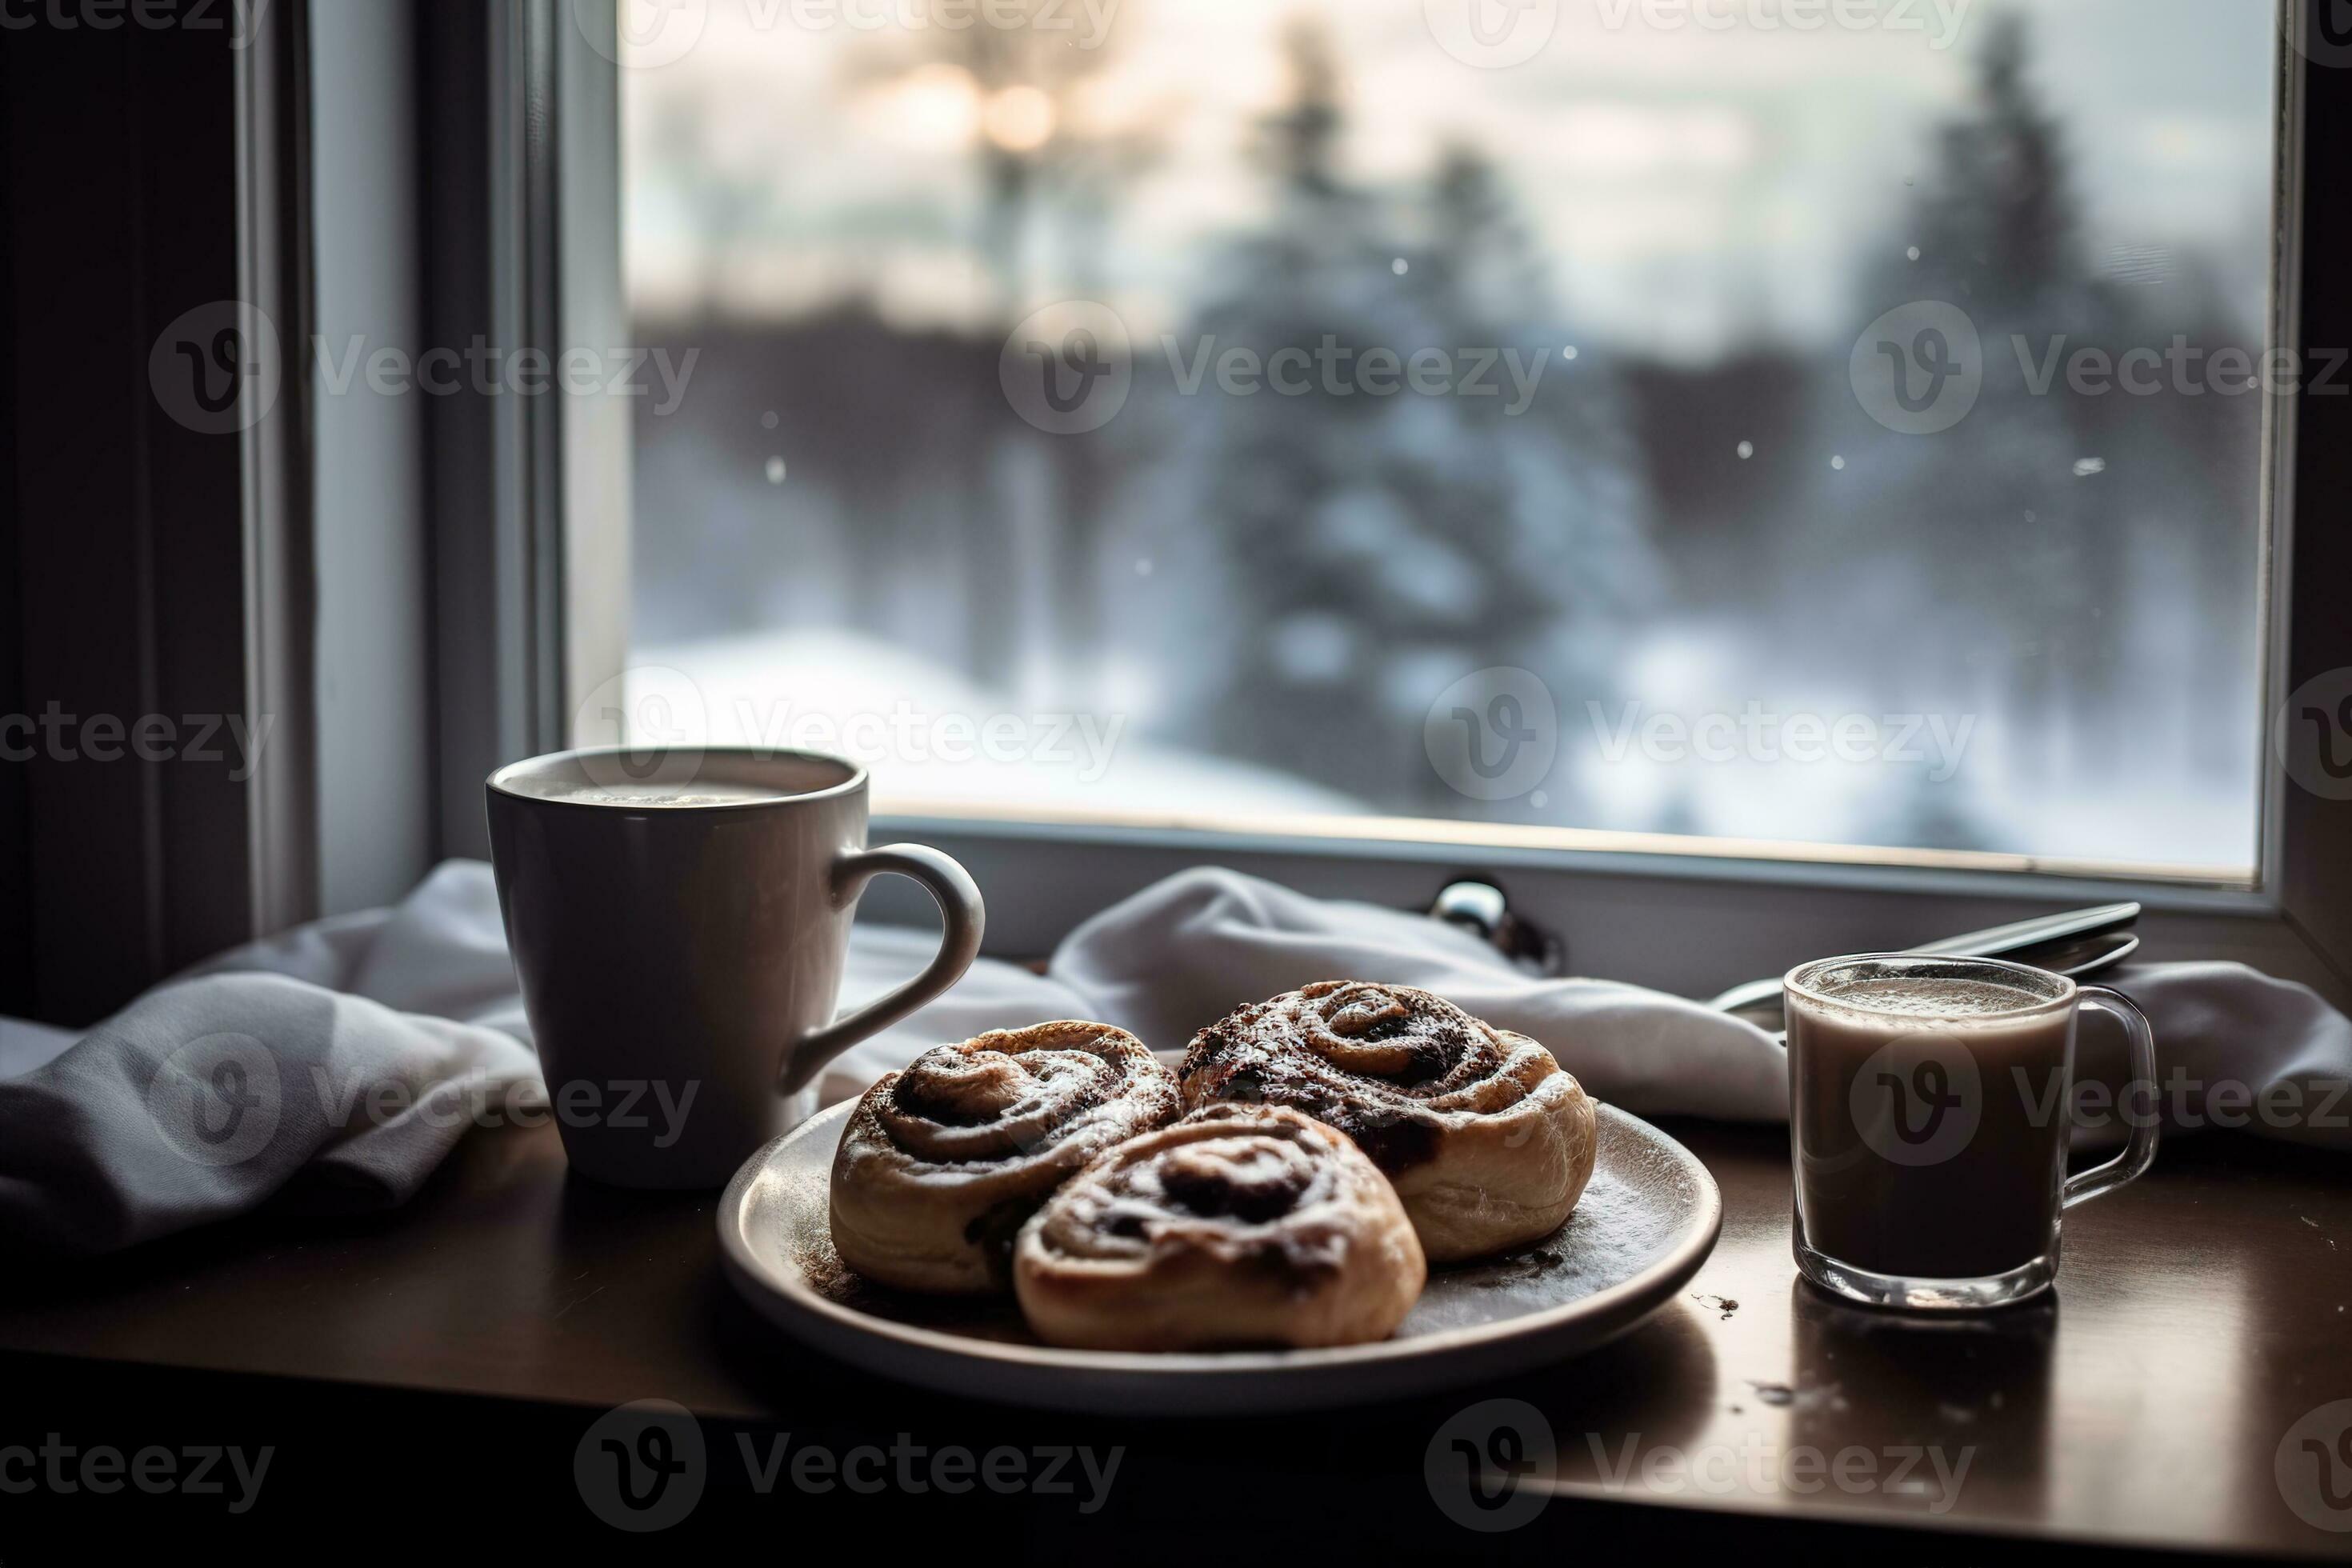 https://static.vecteezy.com/system/resources/previews/031/550/348/large_2x/a-cozy-morning-scene-of-a-steaming-mug-of-hot-chocolate-accompanied-by-a-plate-of-warm-gooey-cinnamon-rolls-set-on-a-windowsill-overlooking-a-peaceful-snow-covered-landscape-generative-ai-photo.jpg